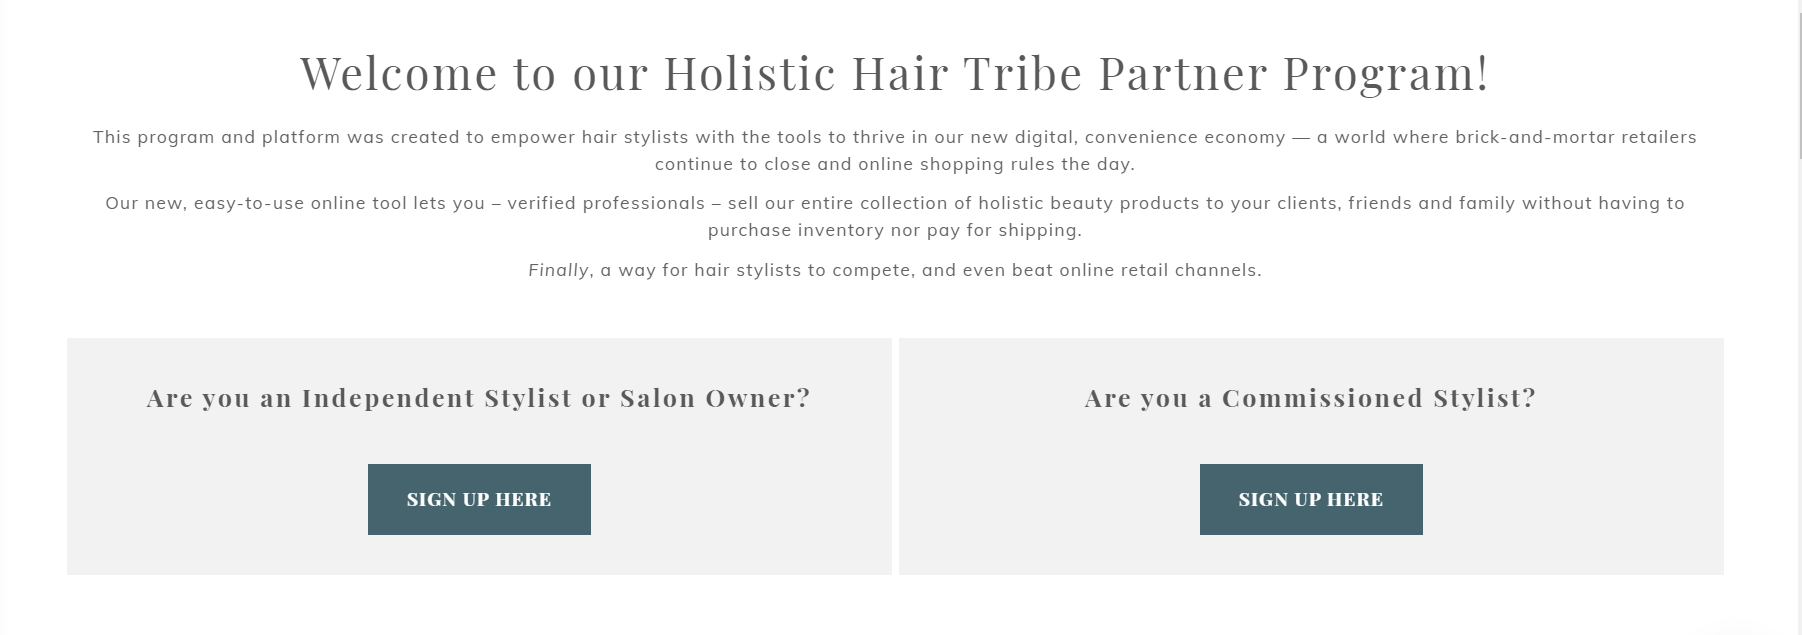 holistic-hair-tribe-sign-up